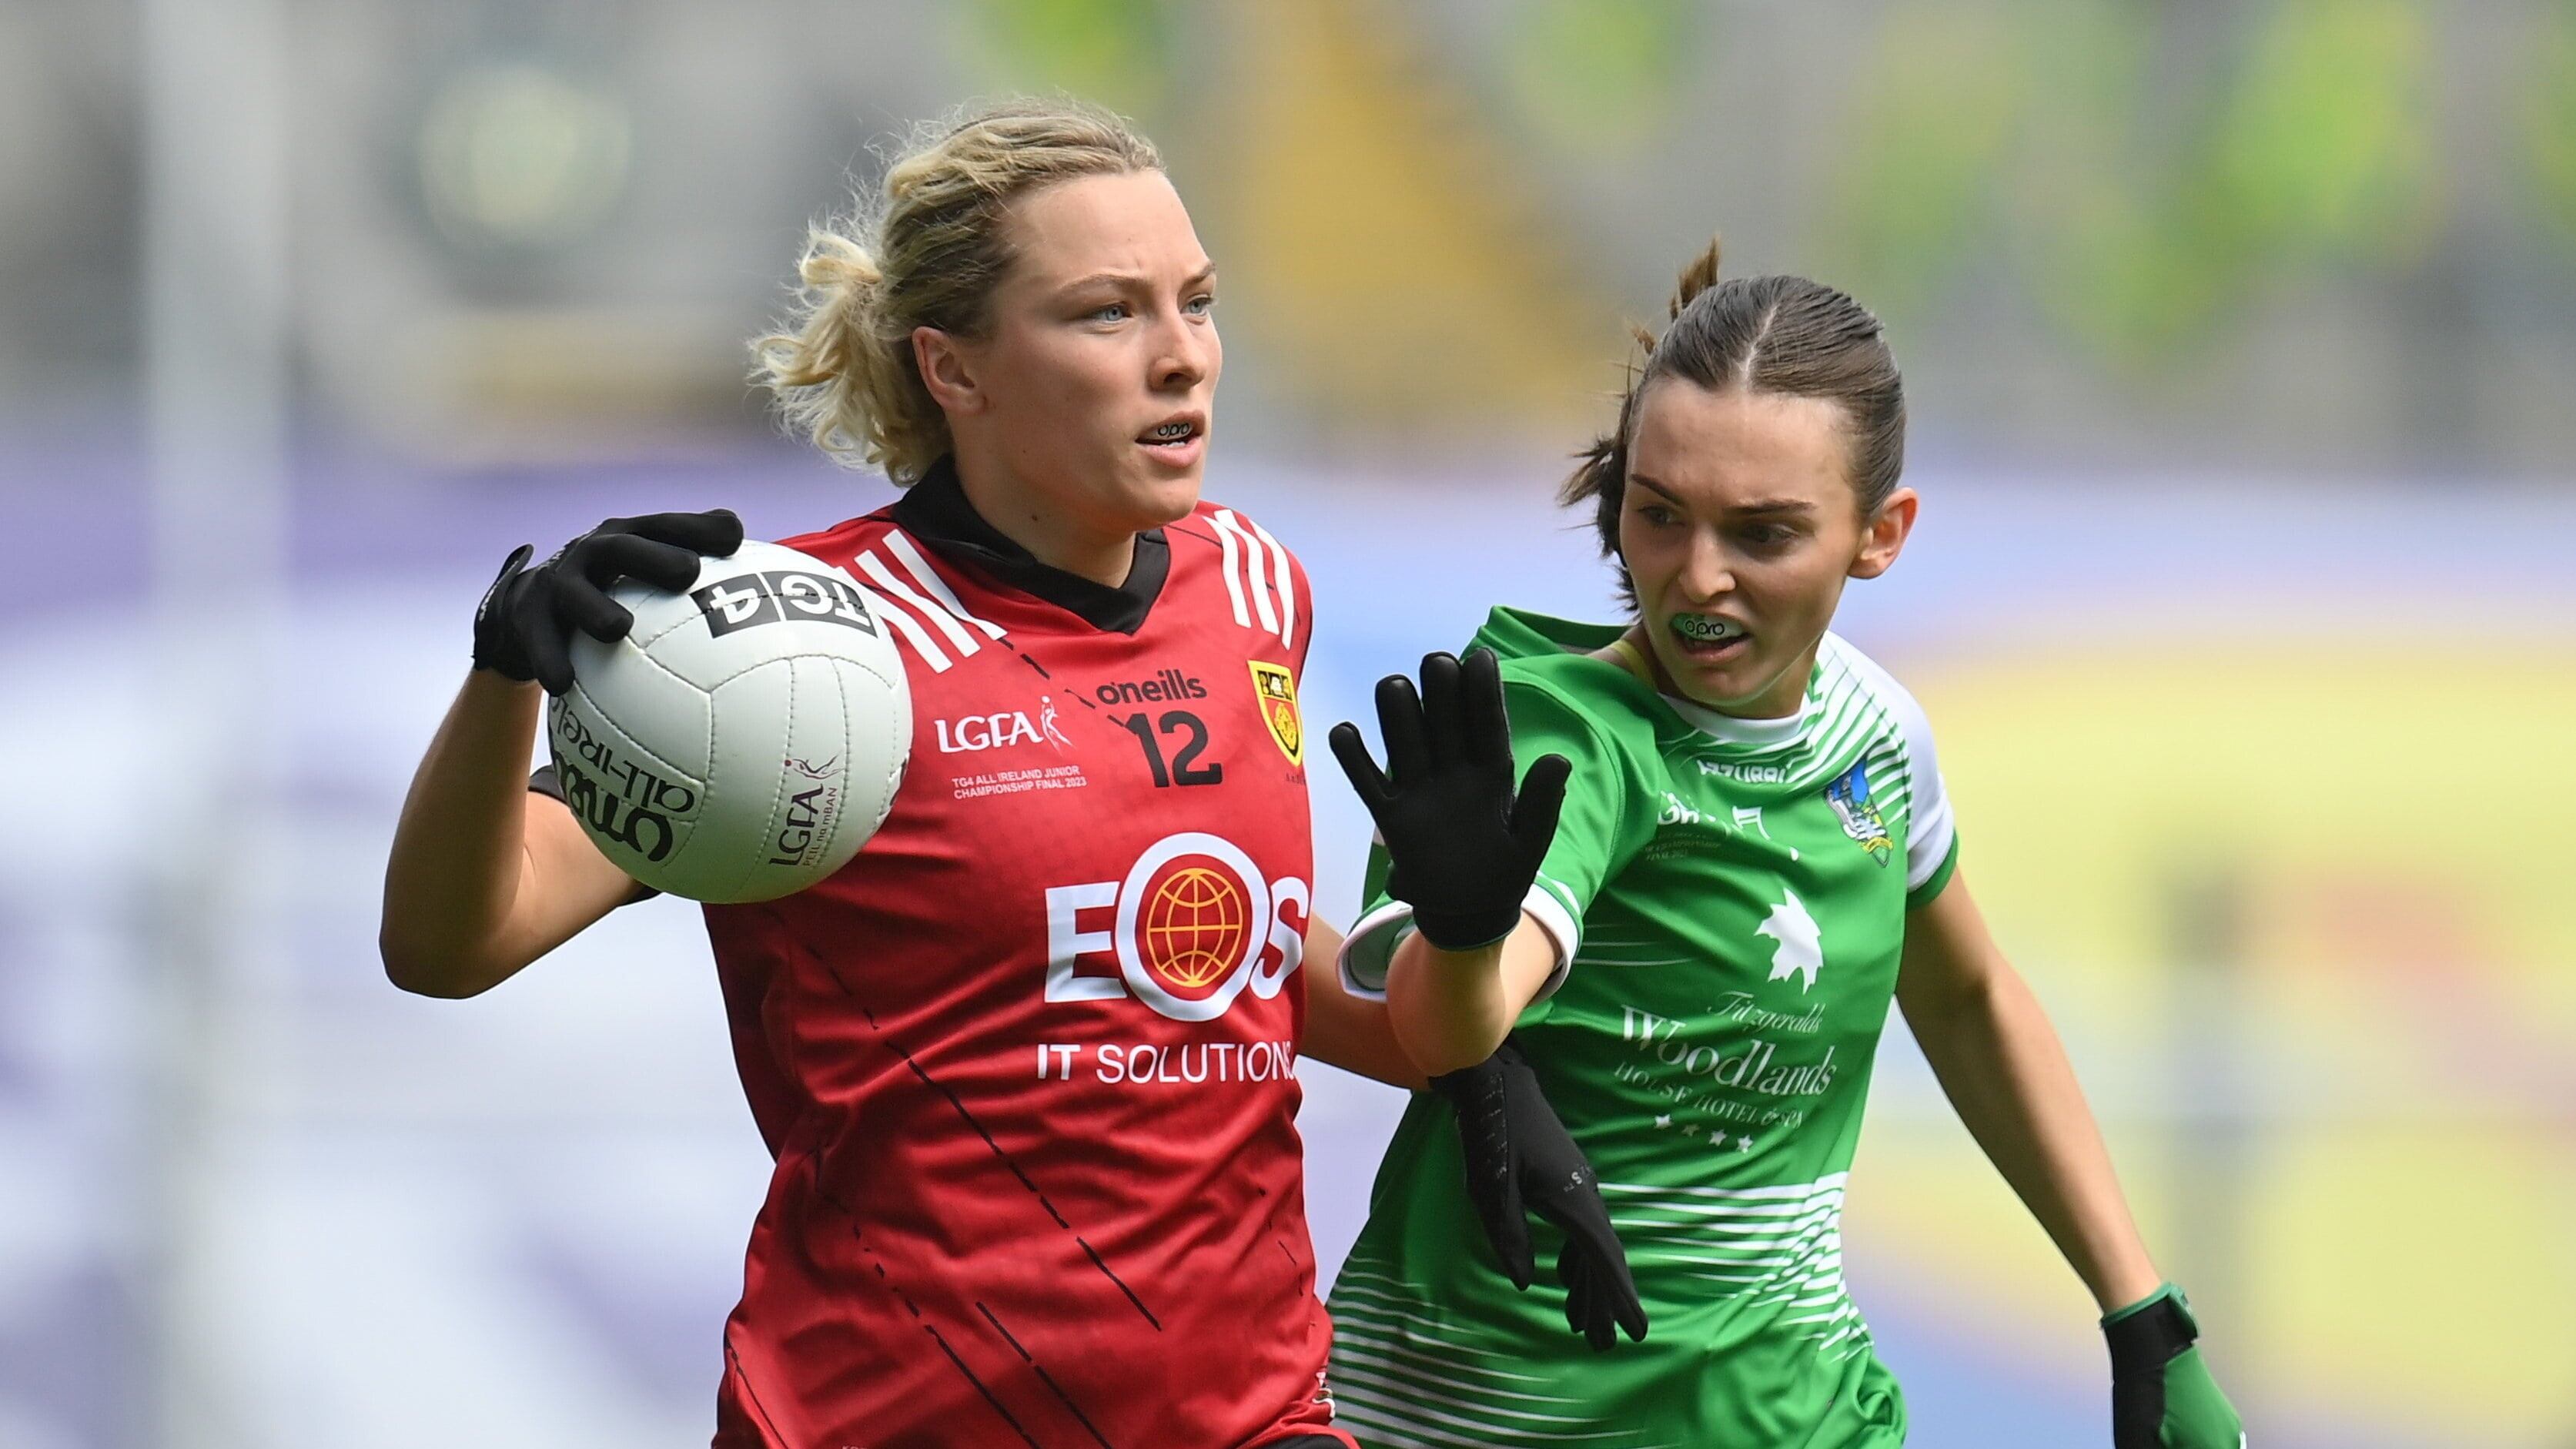 Laoise Duffy of Down in action against Lauren Ryan of Limerick during the 2023 TG4 All-Ireland Ladies Junior Football Championship Final match between Down and Limerick at Croke Park in Dublin. Photo by Seb Daly/Sportsfile